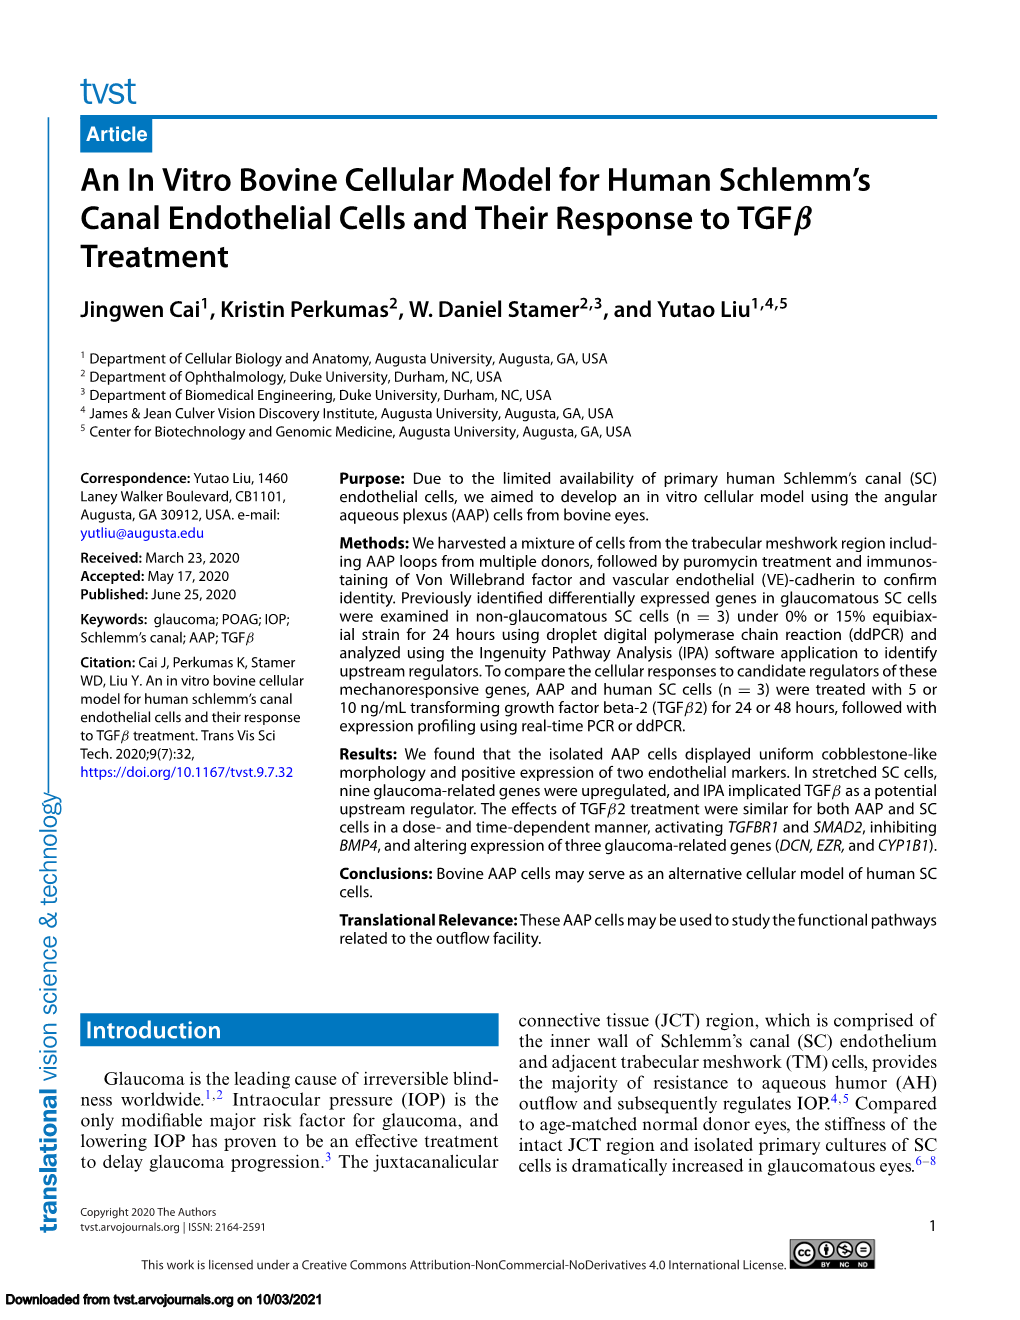 An in Vitro Bovine Cellular Model for Human Schlemm's Canal